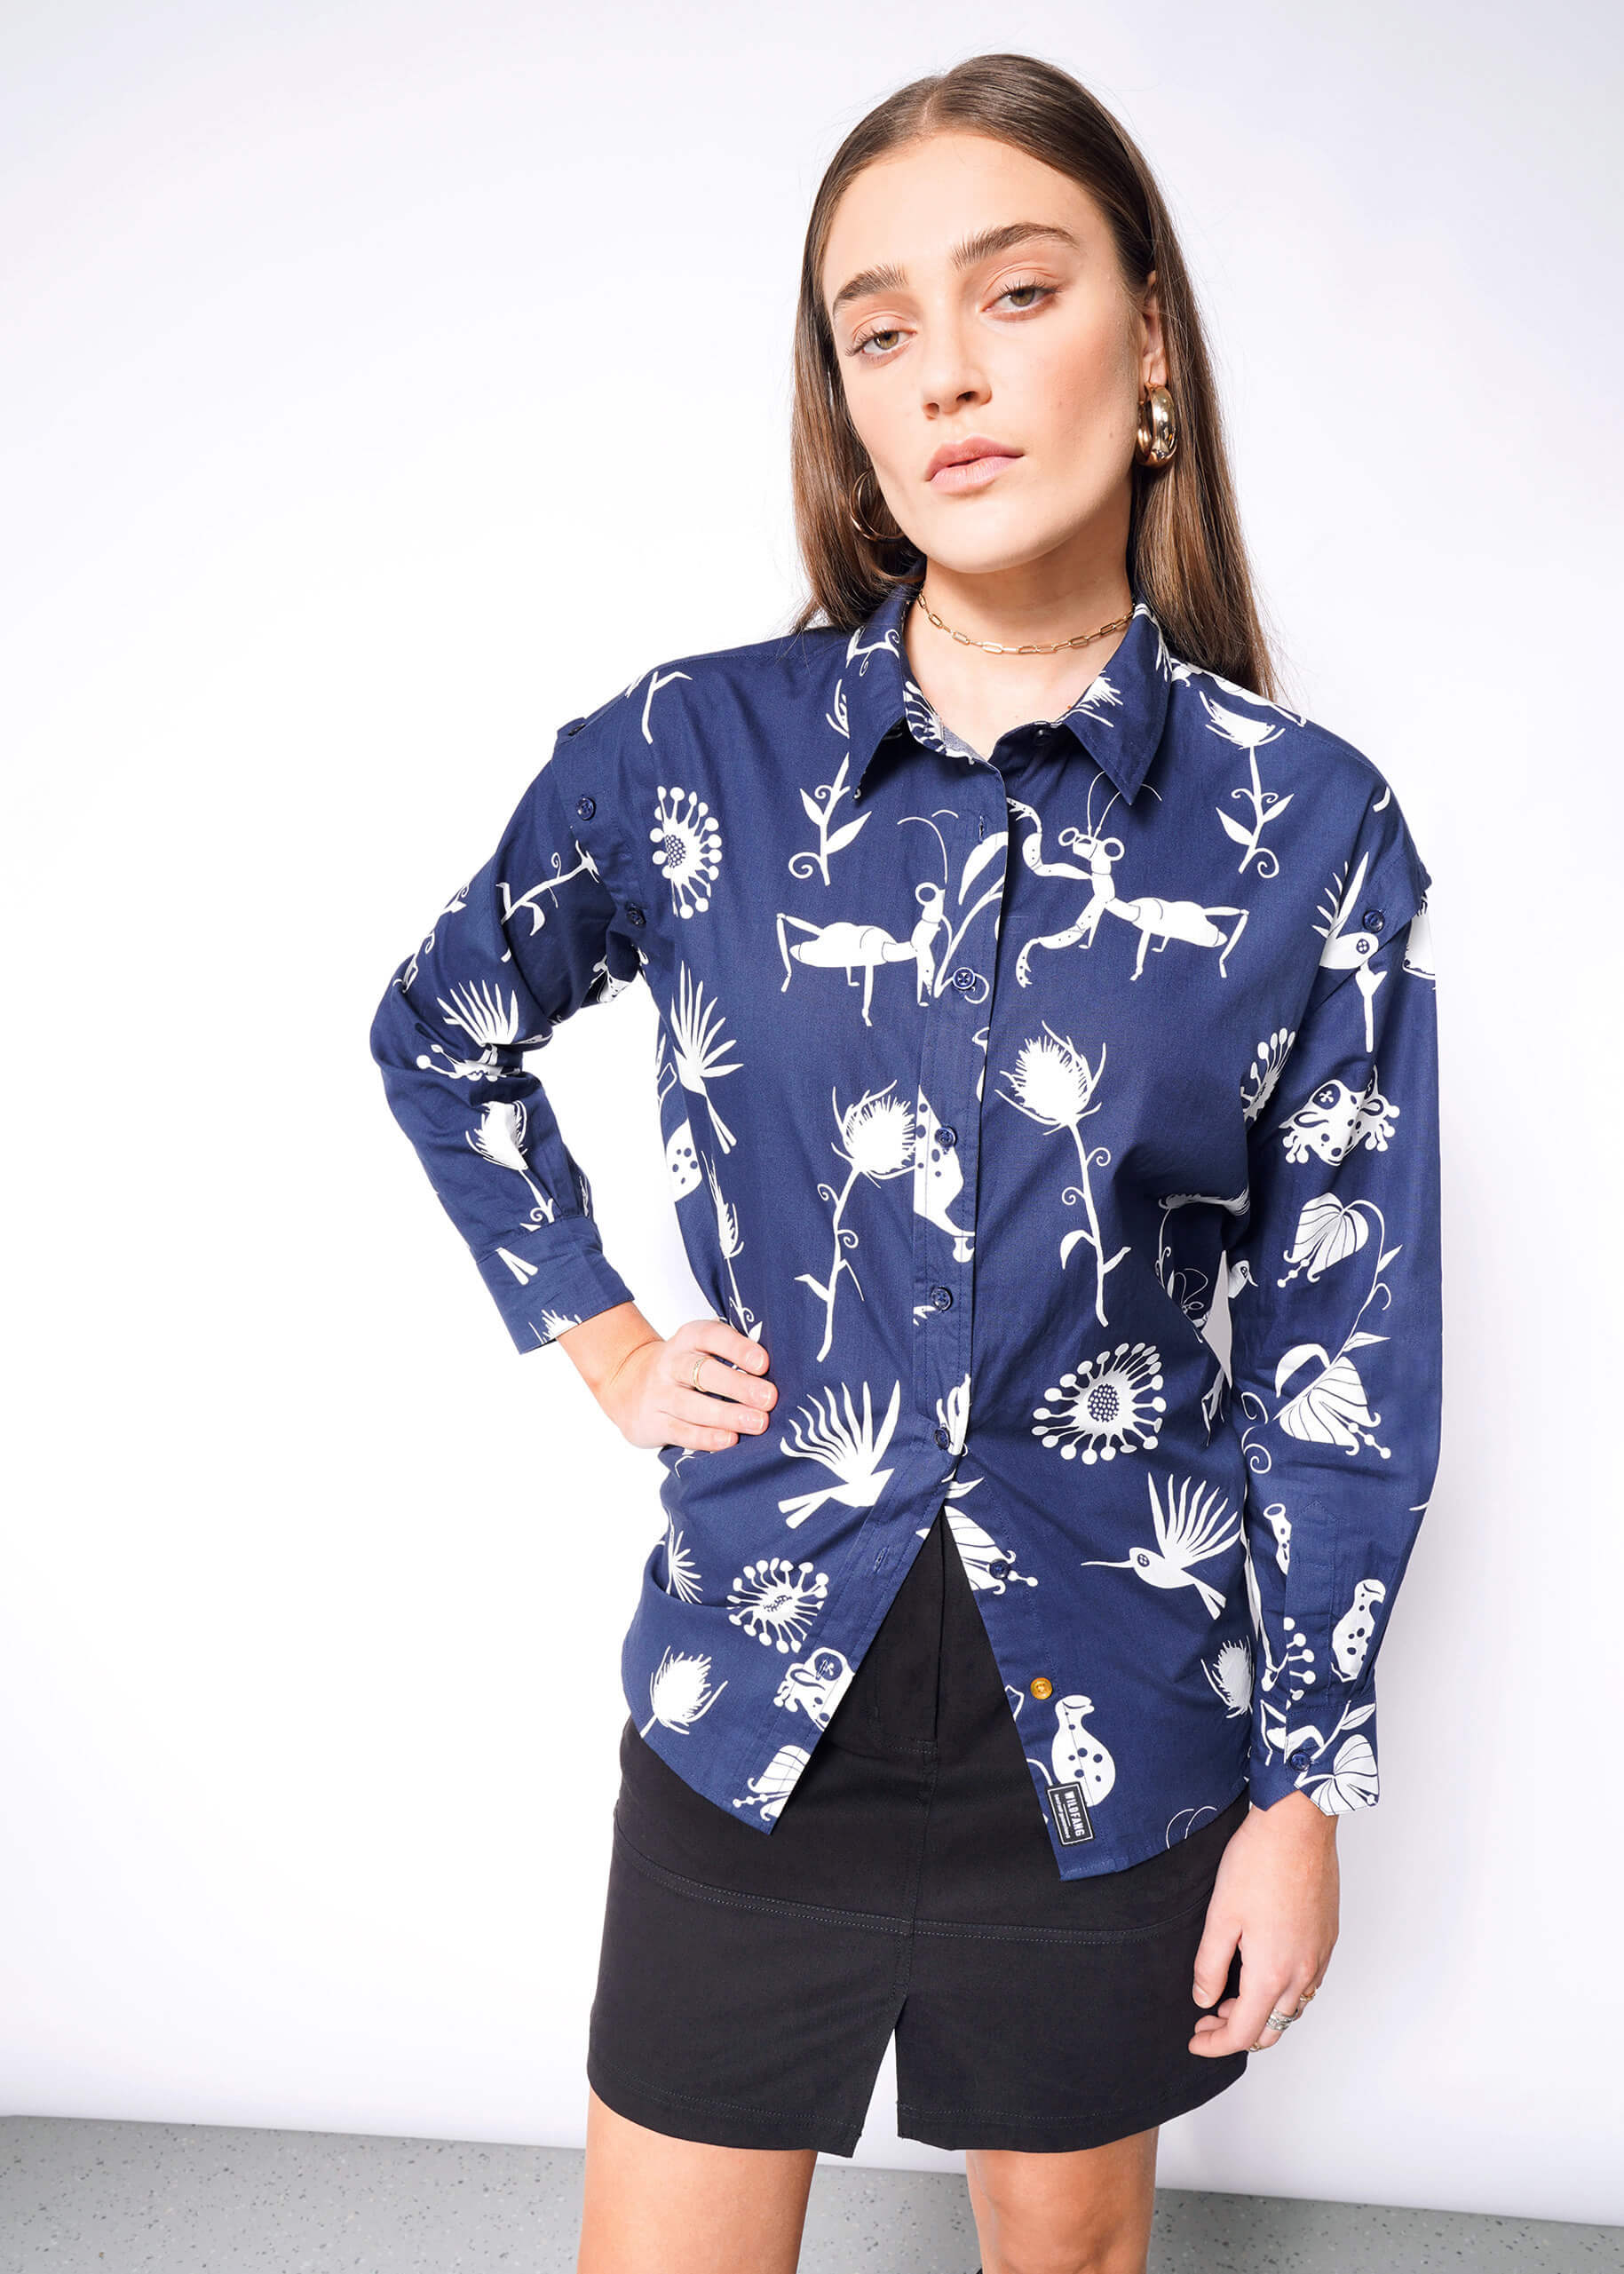 Coraline© Convertible Sleeve Button Up by Laika x Wildfang